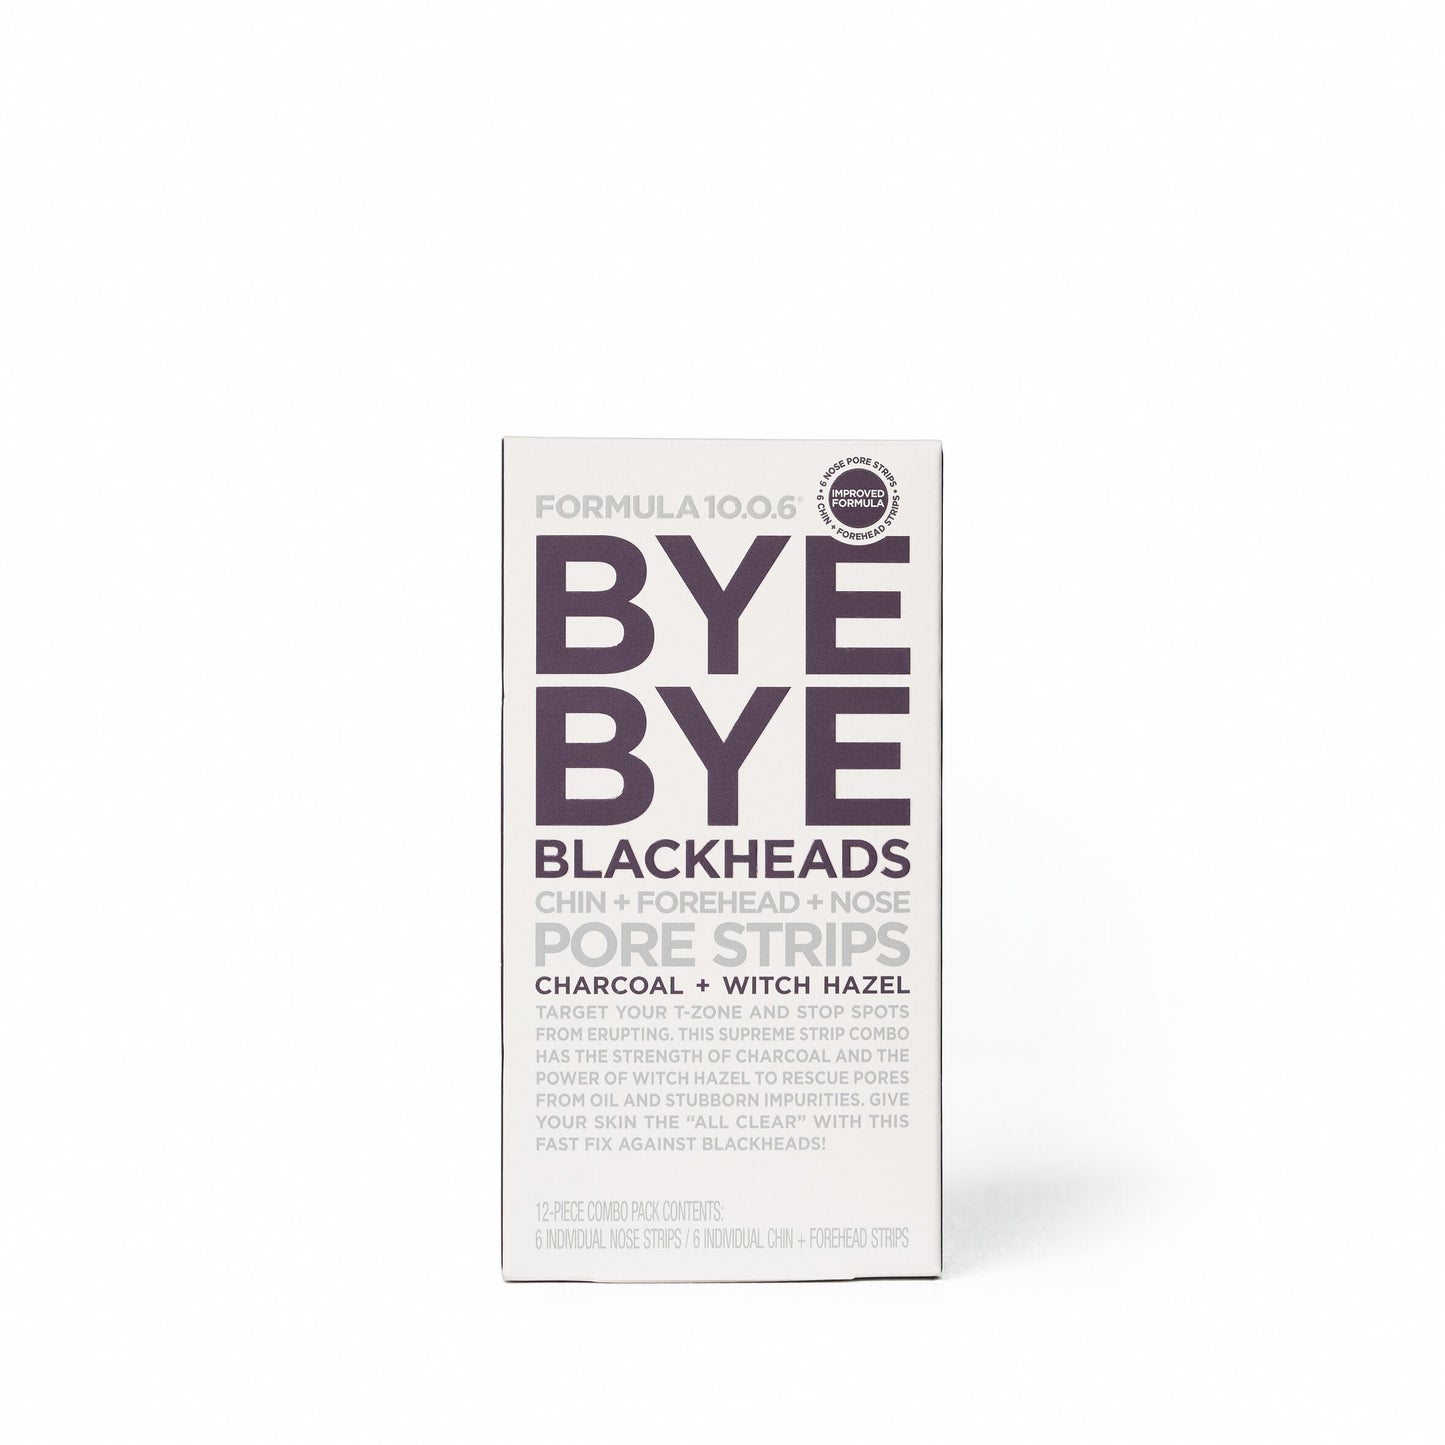 Bye Bye Blackheads Chin, Forehead and Nose Pore Strips